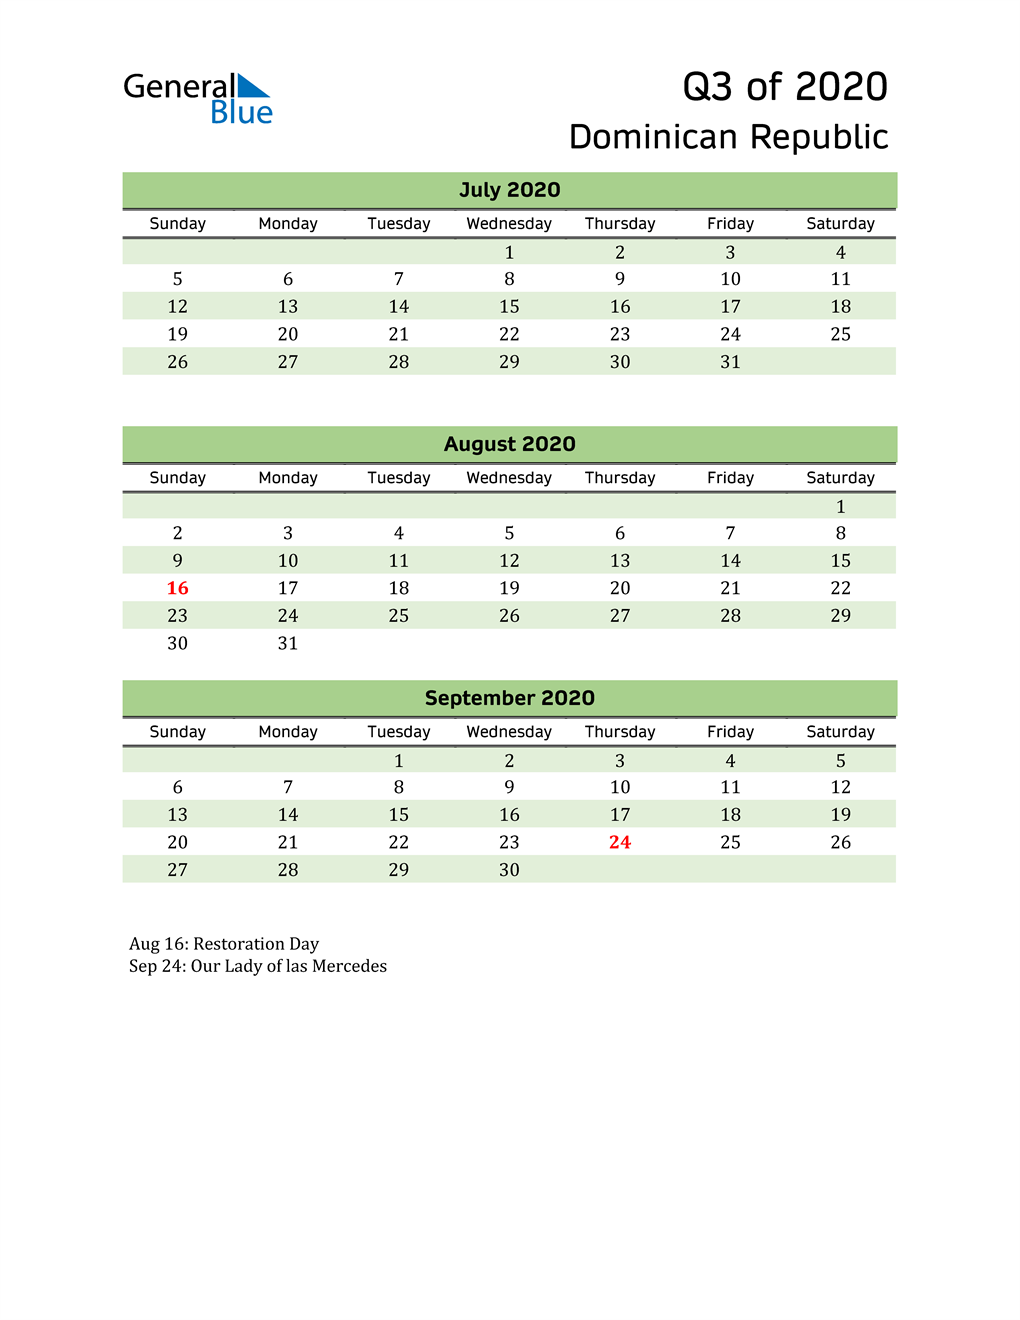  Quarterly Calendar 2020 with Dominican Republic Holidays 